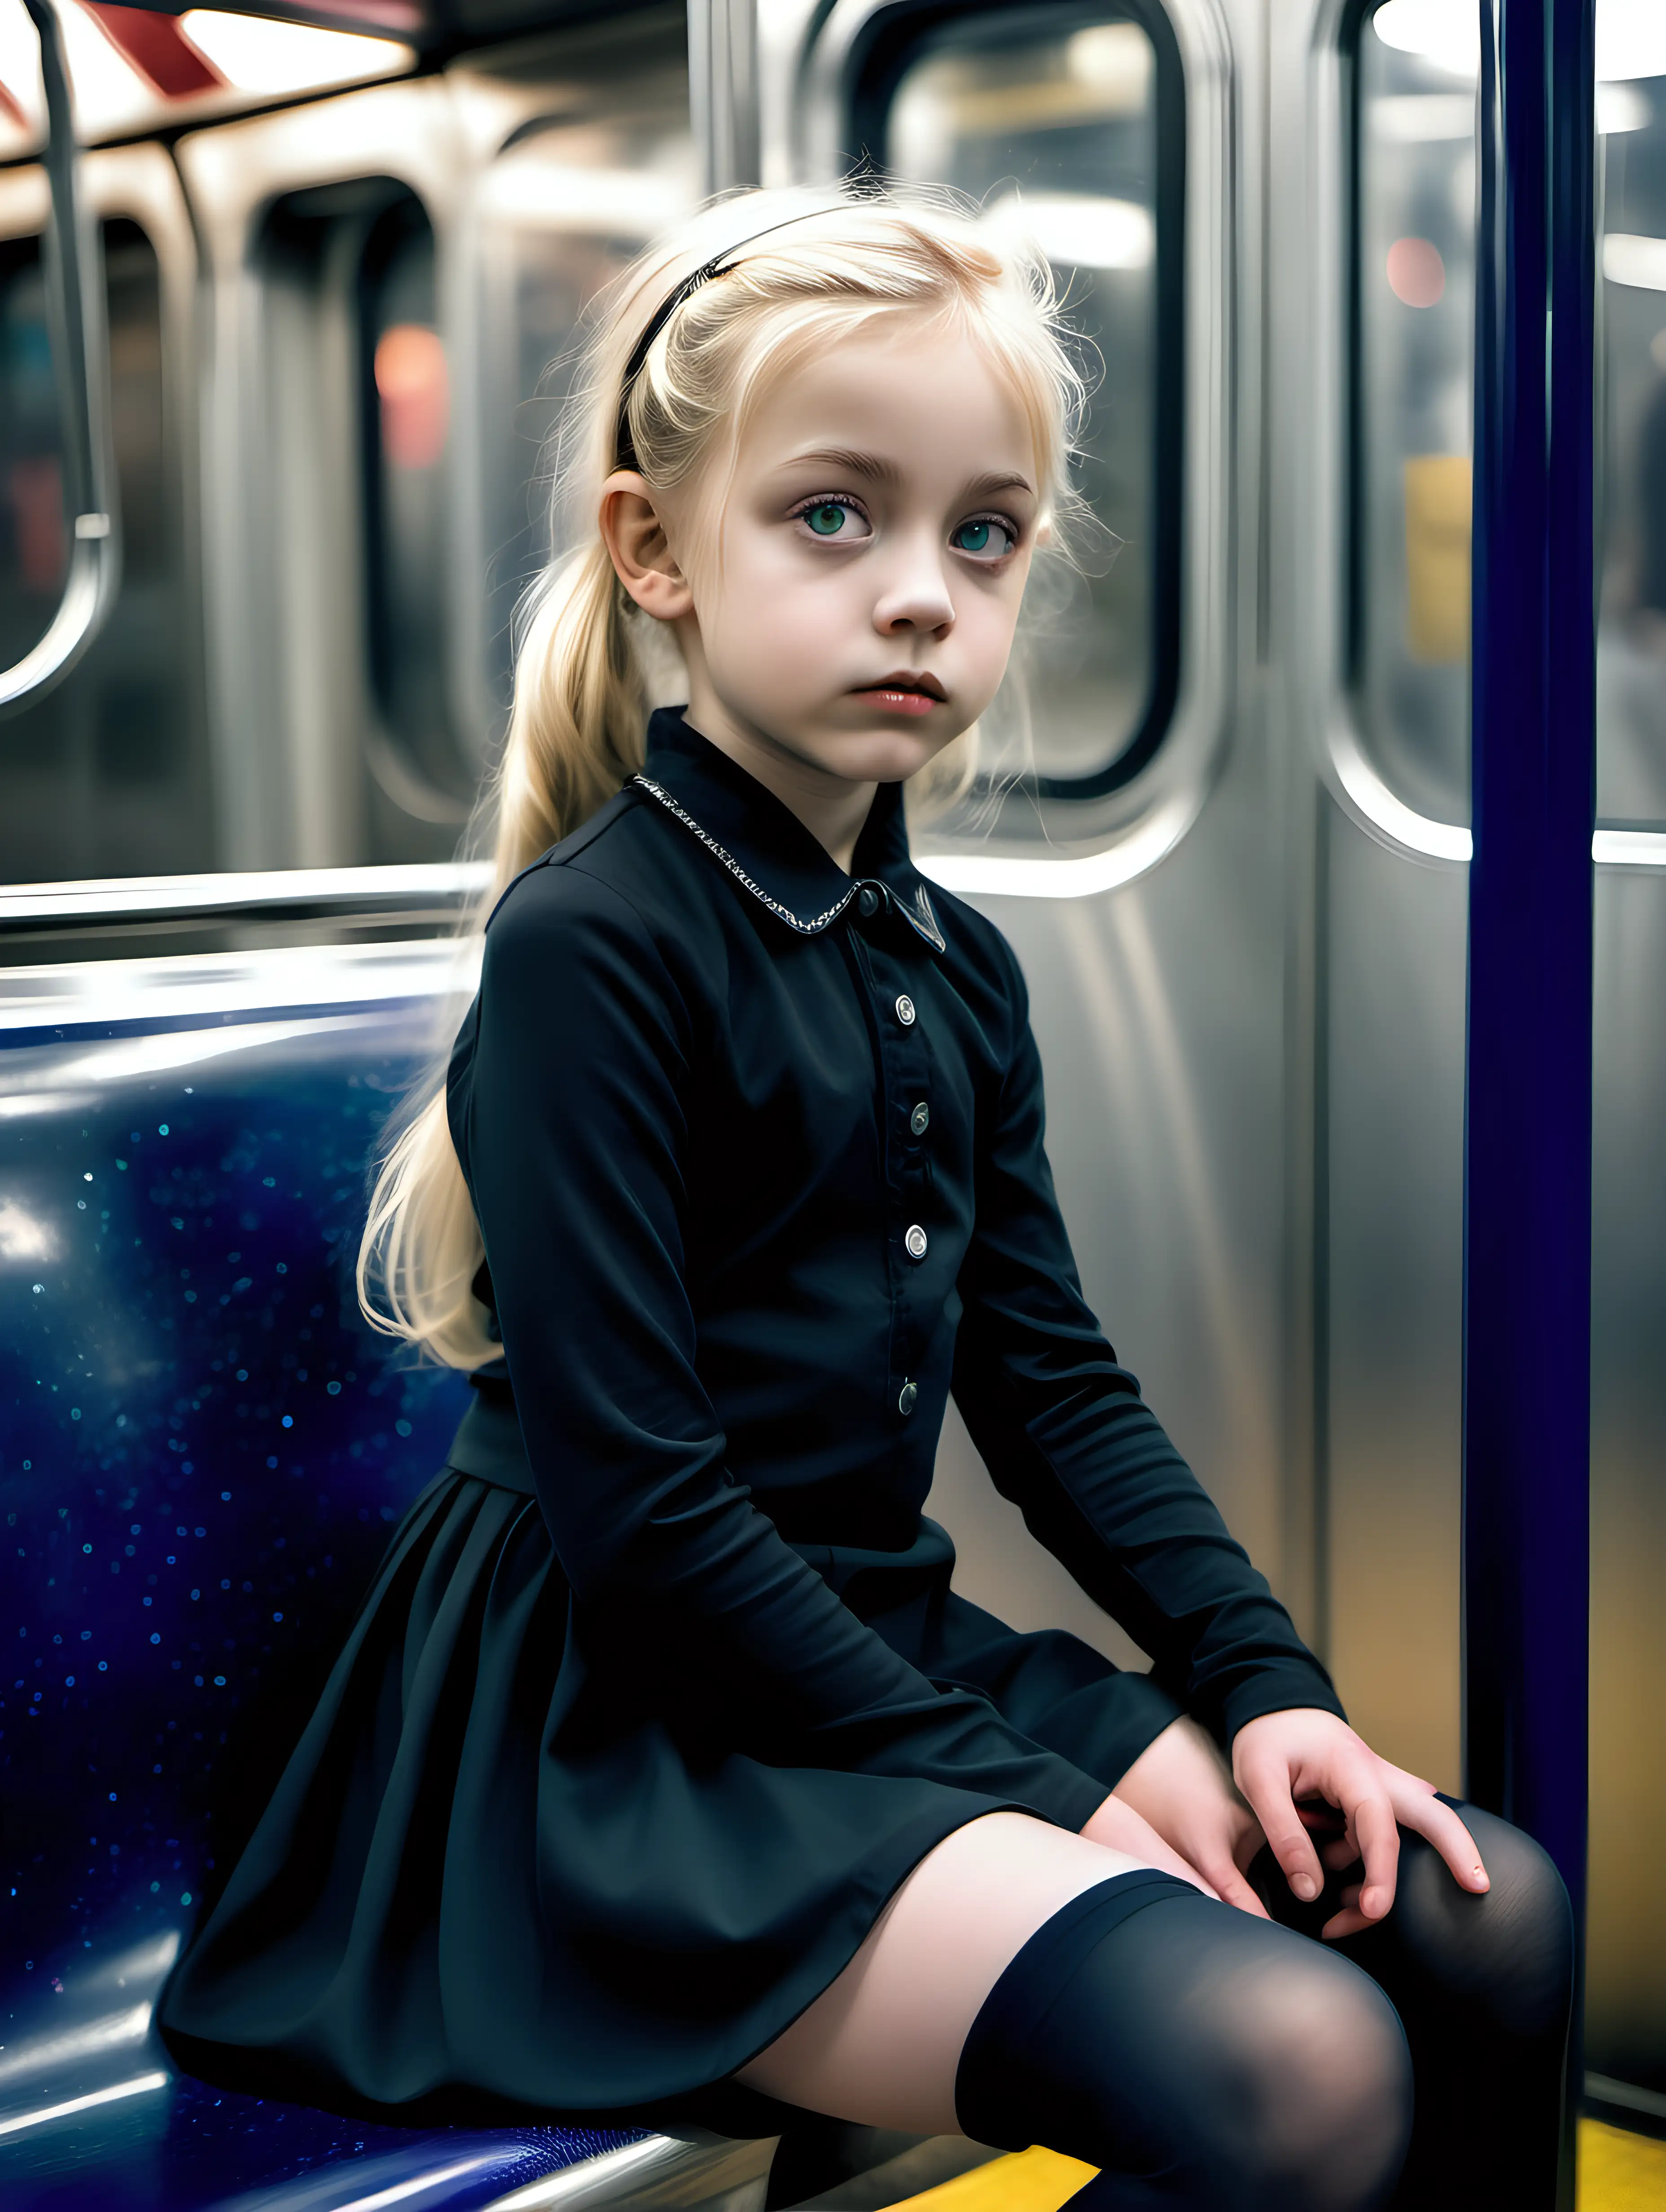 Gothic Little Girl with Mom in Subway Portrait Shot with Neon Lights and High Stiletto Heels